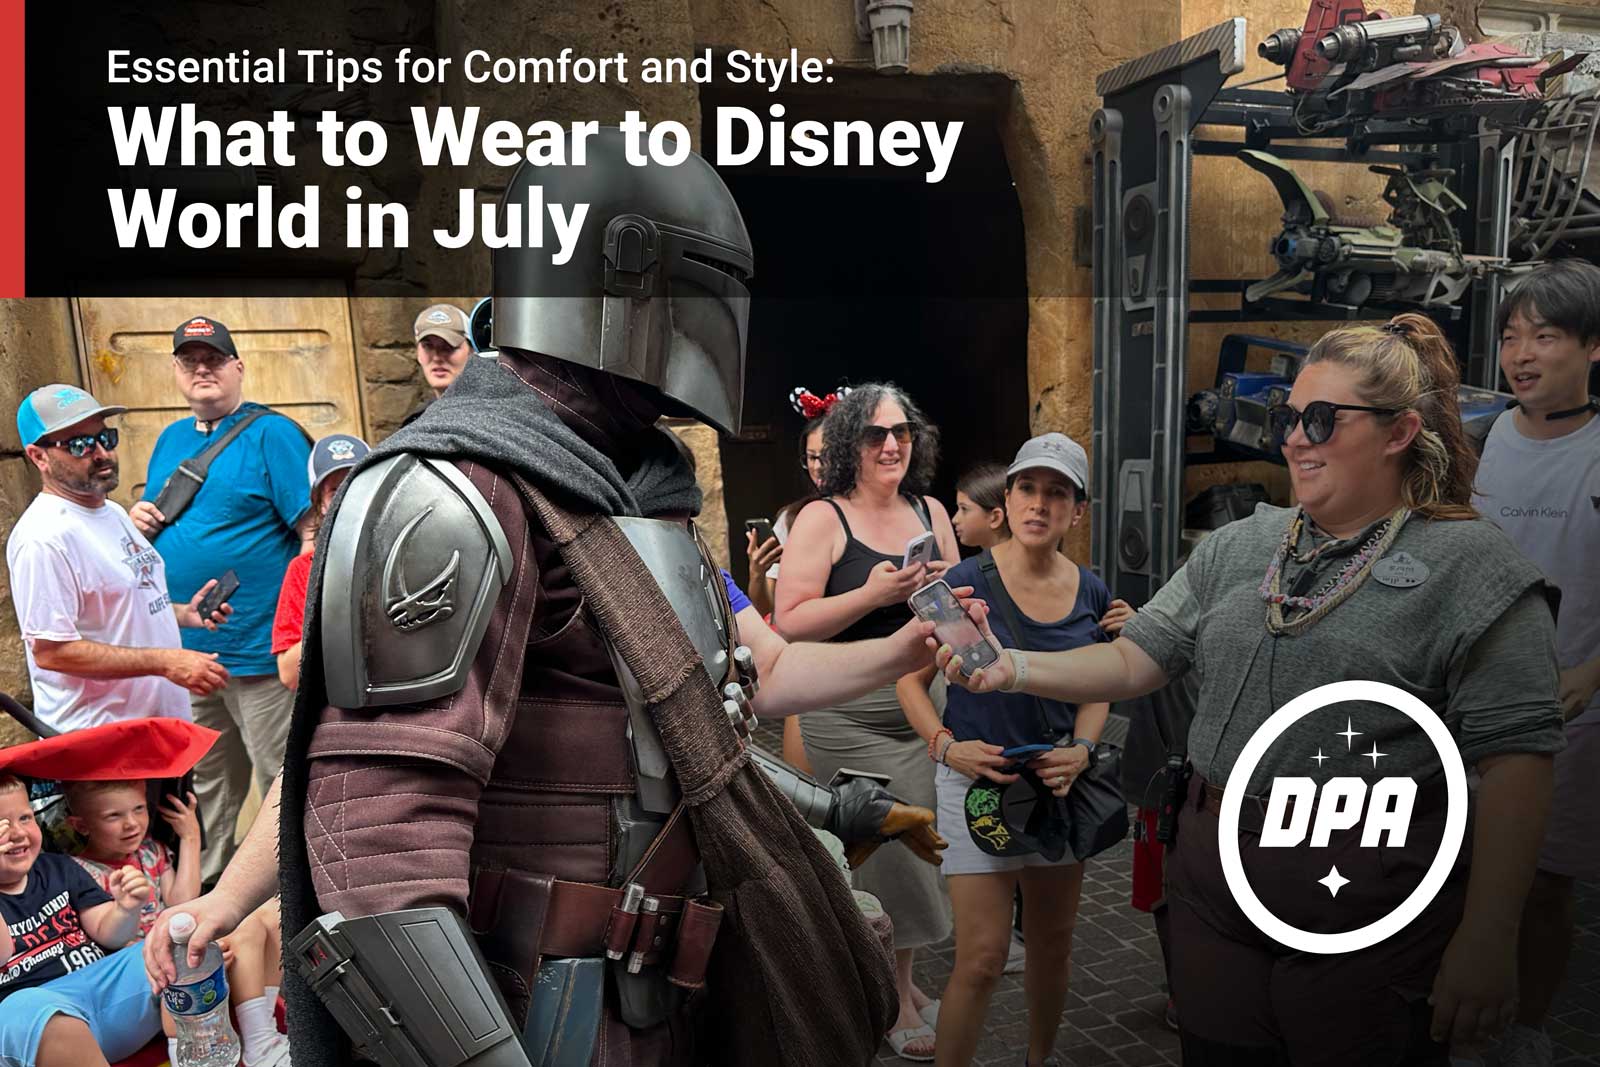 What to wear to Disney World in July